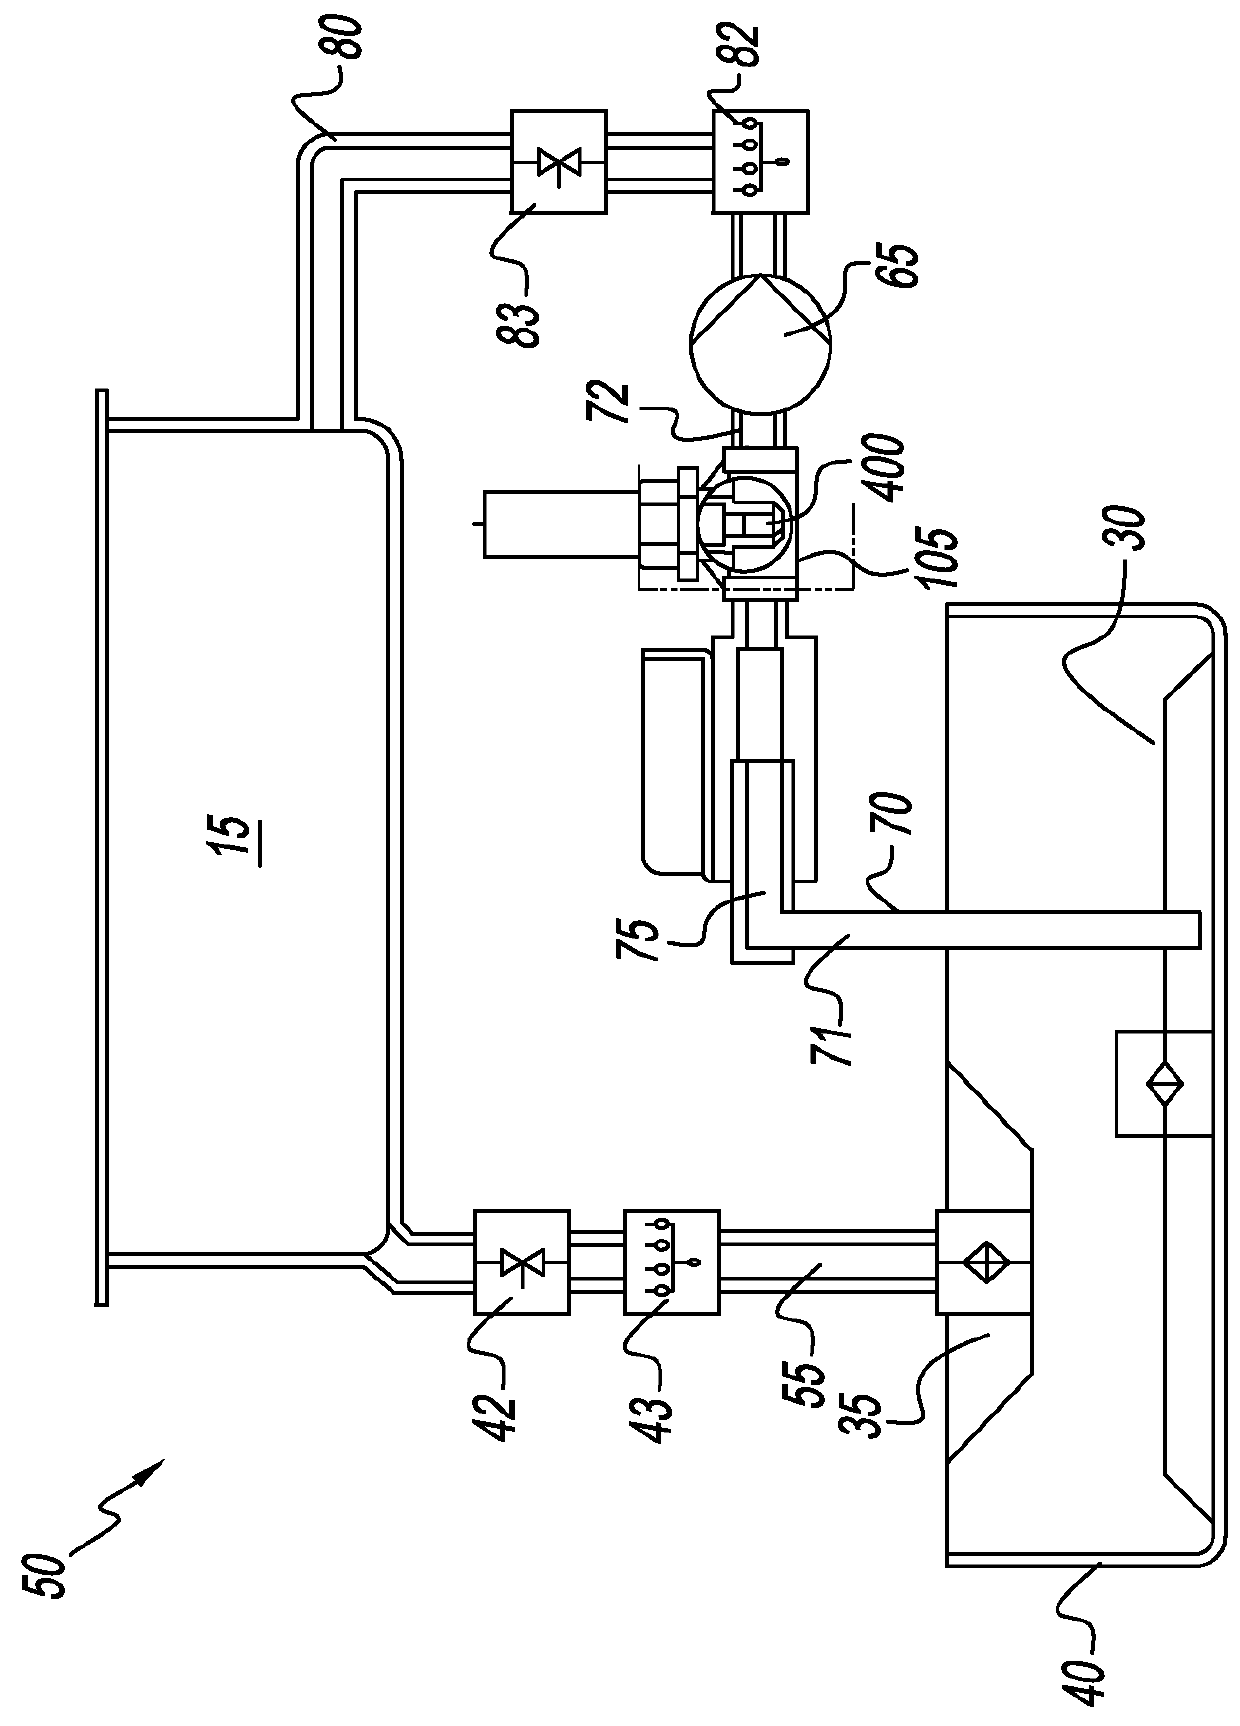 Method and apparatus for a cooking oil quality sensor